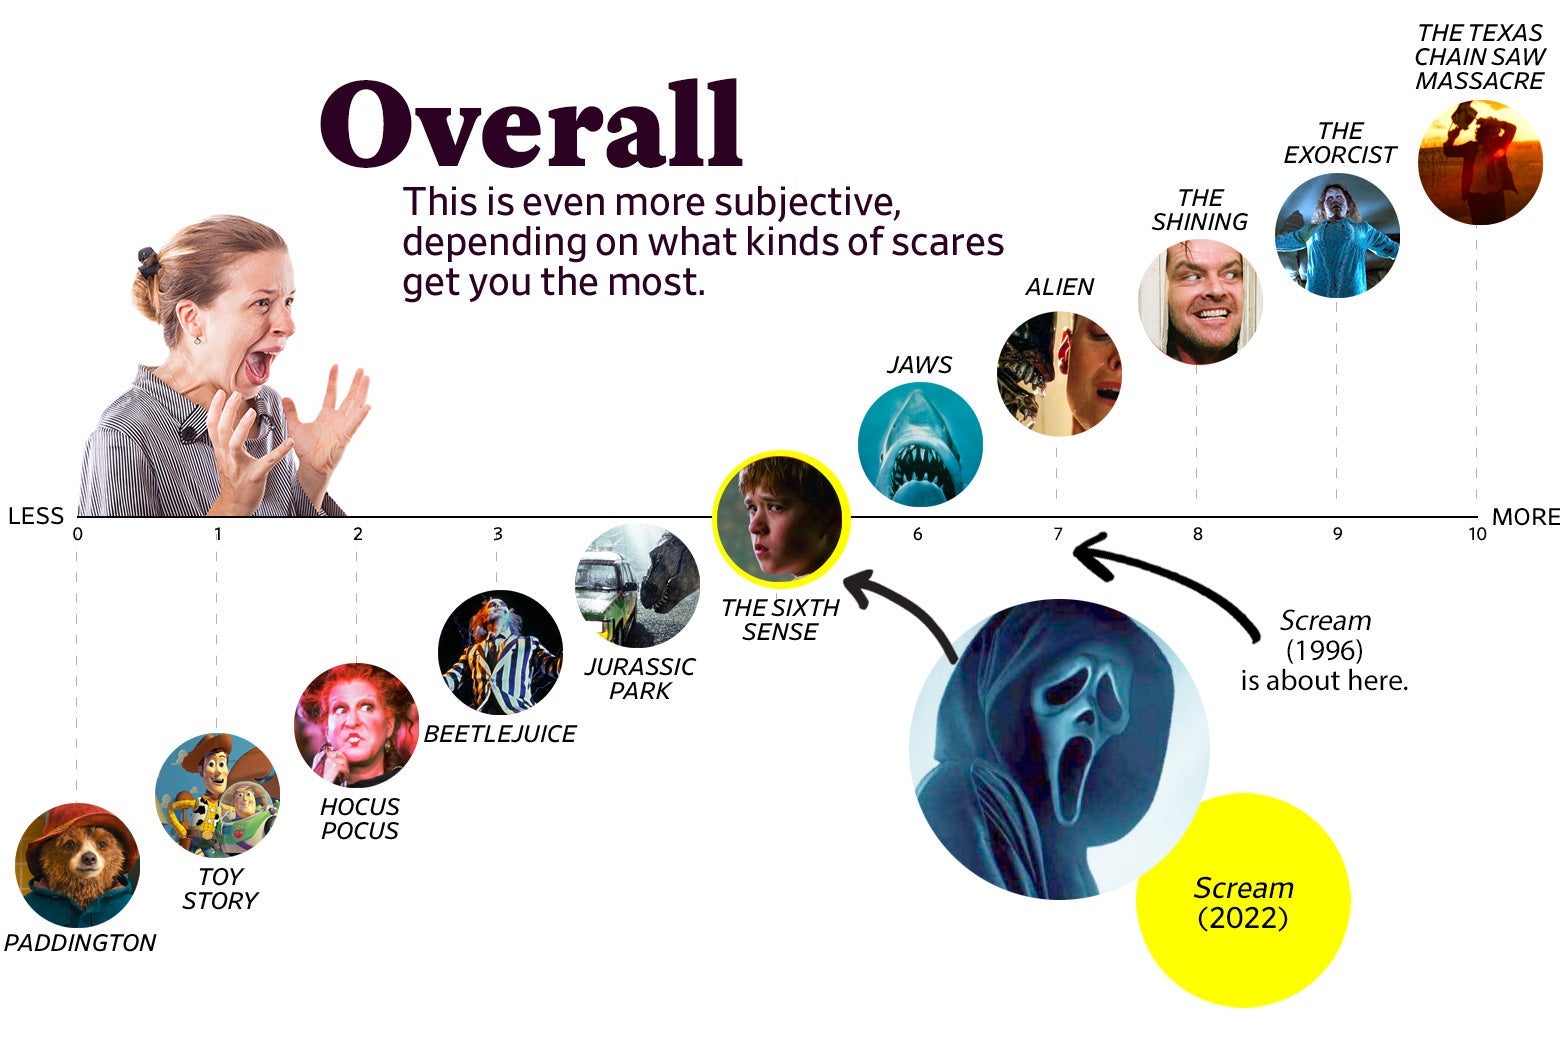 A chart titled “Overall: This is even more subjective, depending on what kinds of scares get you the most” shows that Scream (2022) ranks as a 5 overall, roughly the same as The Sixth Sense, while the original ranks a 7, roughly the same as Alien. The scale ranges from Paddington (0) to the original Texas Chain Saw Massacre (10).